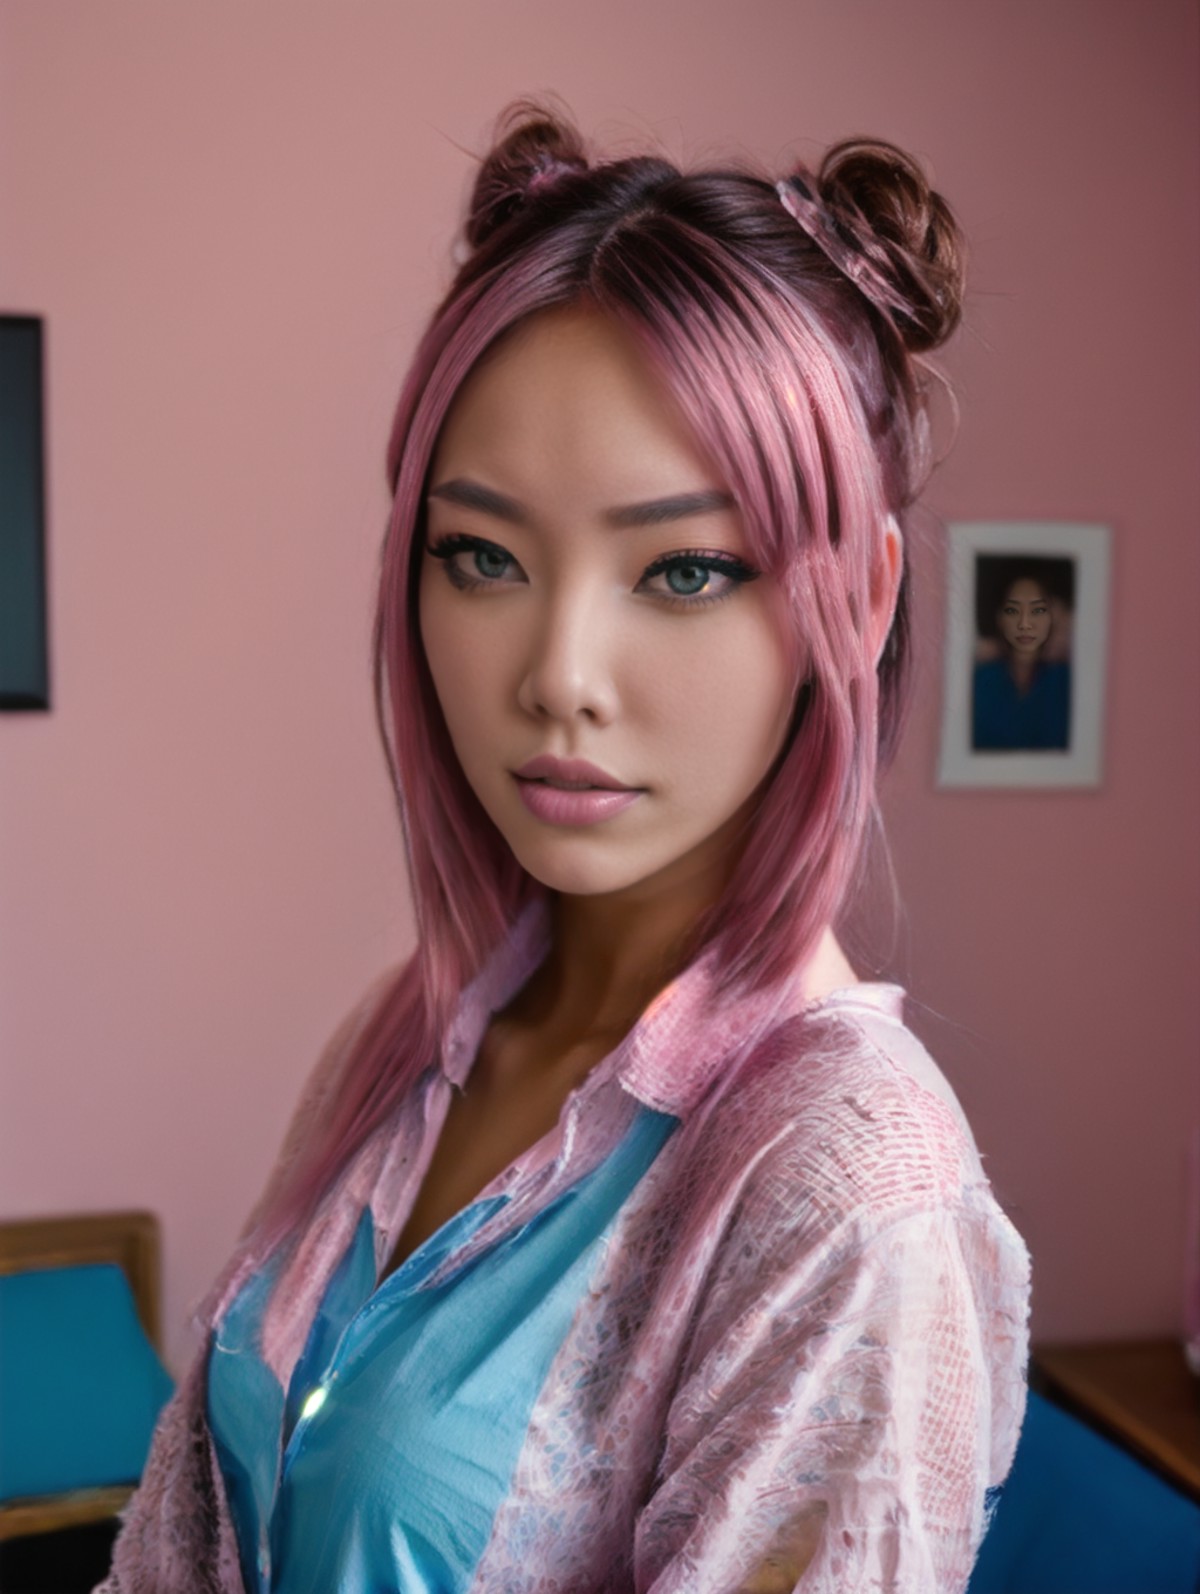 portrait of a woman, wearing a xtra sweetshirt, in here room, she is a nerd, egirl, ultra detail face roseV2, pink hair <l...